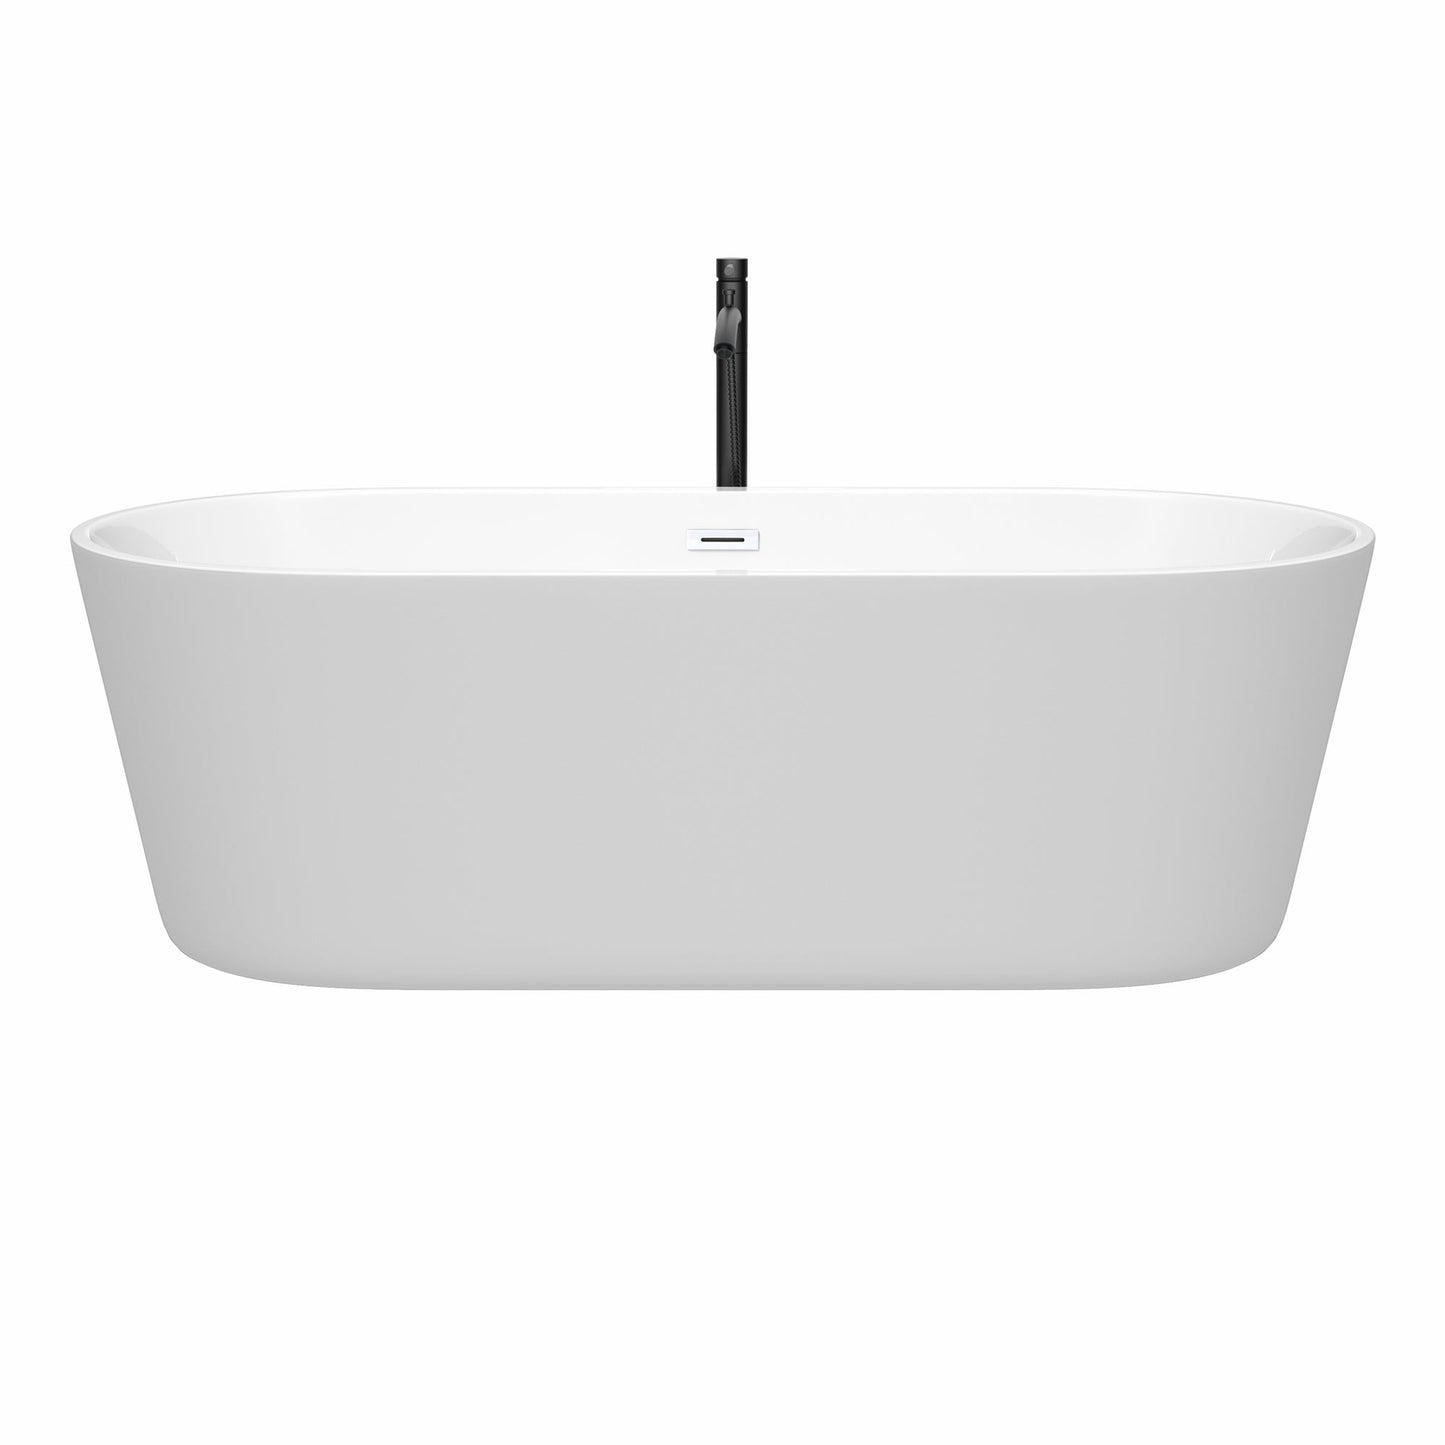 Wyndham Collection Carissa 71" Freestanding Bathtub in White With Shiny White Trim and Floor Mounted Faucet in Matte Black